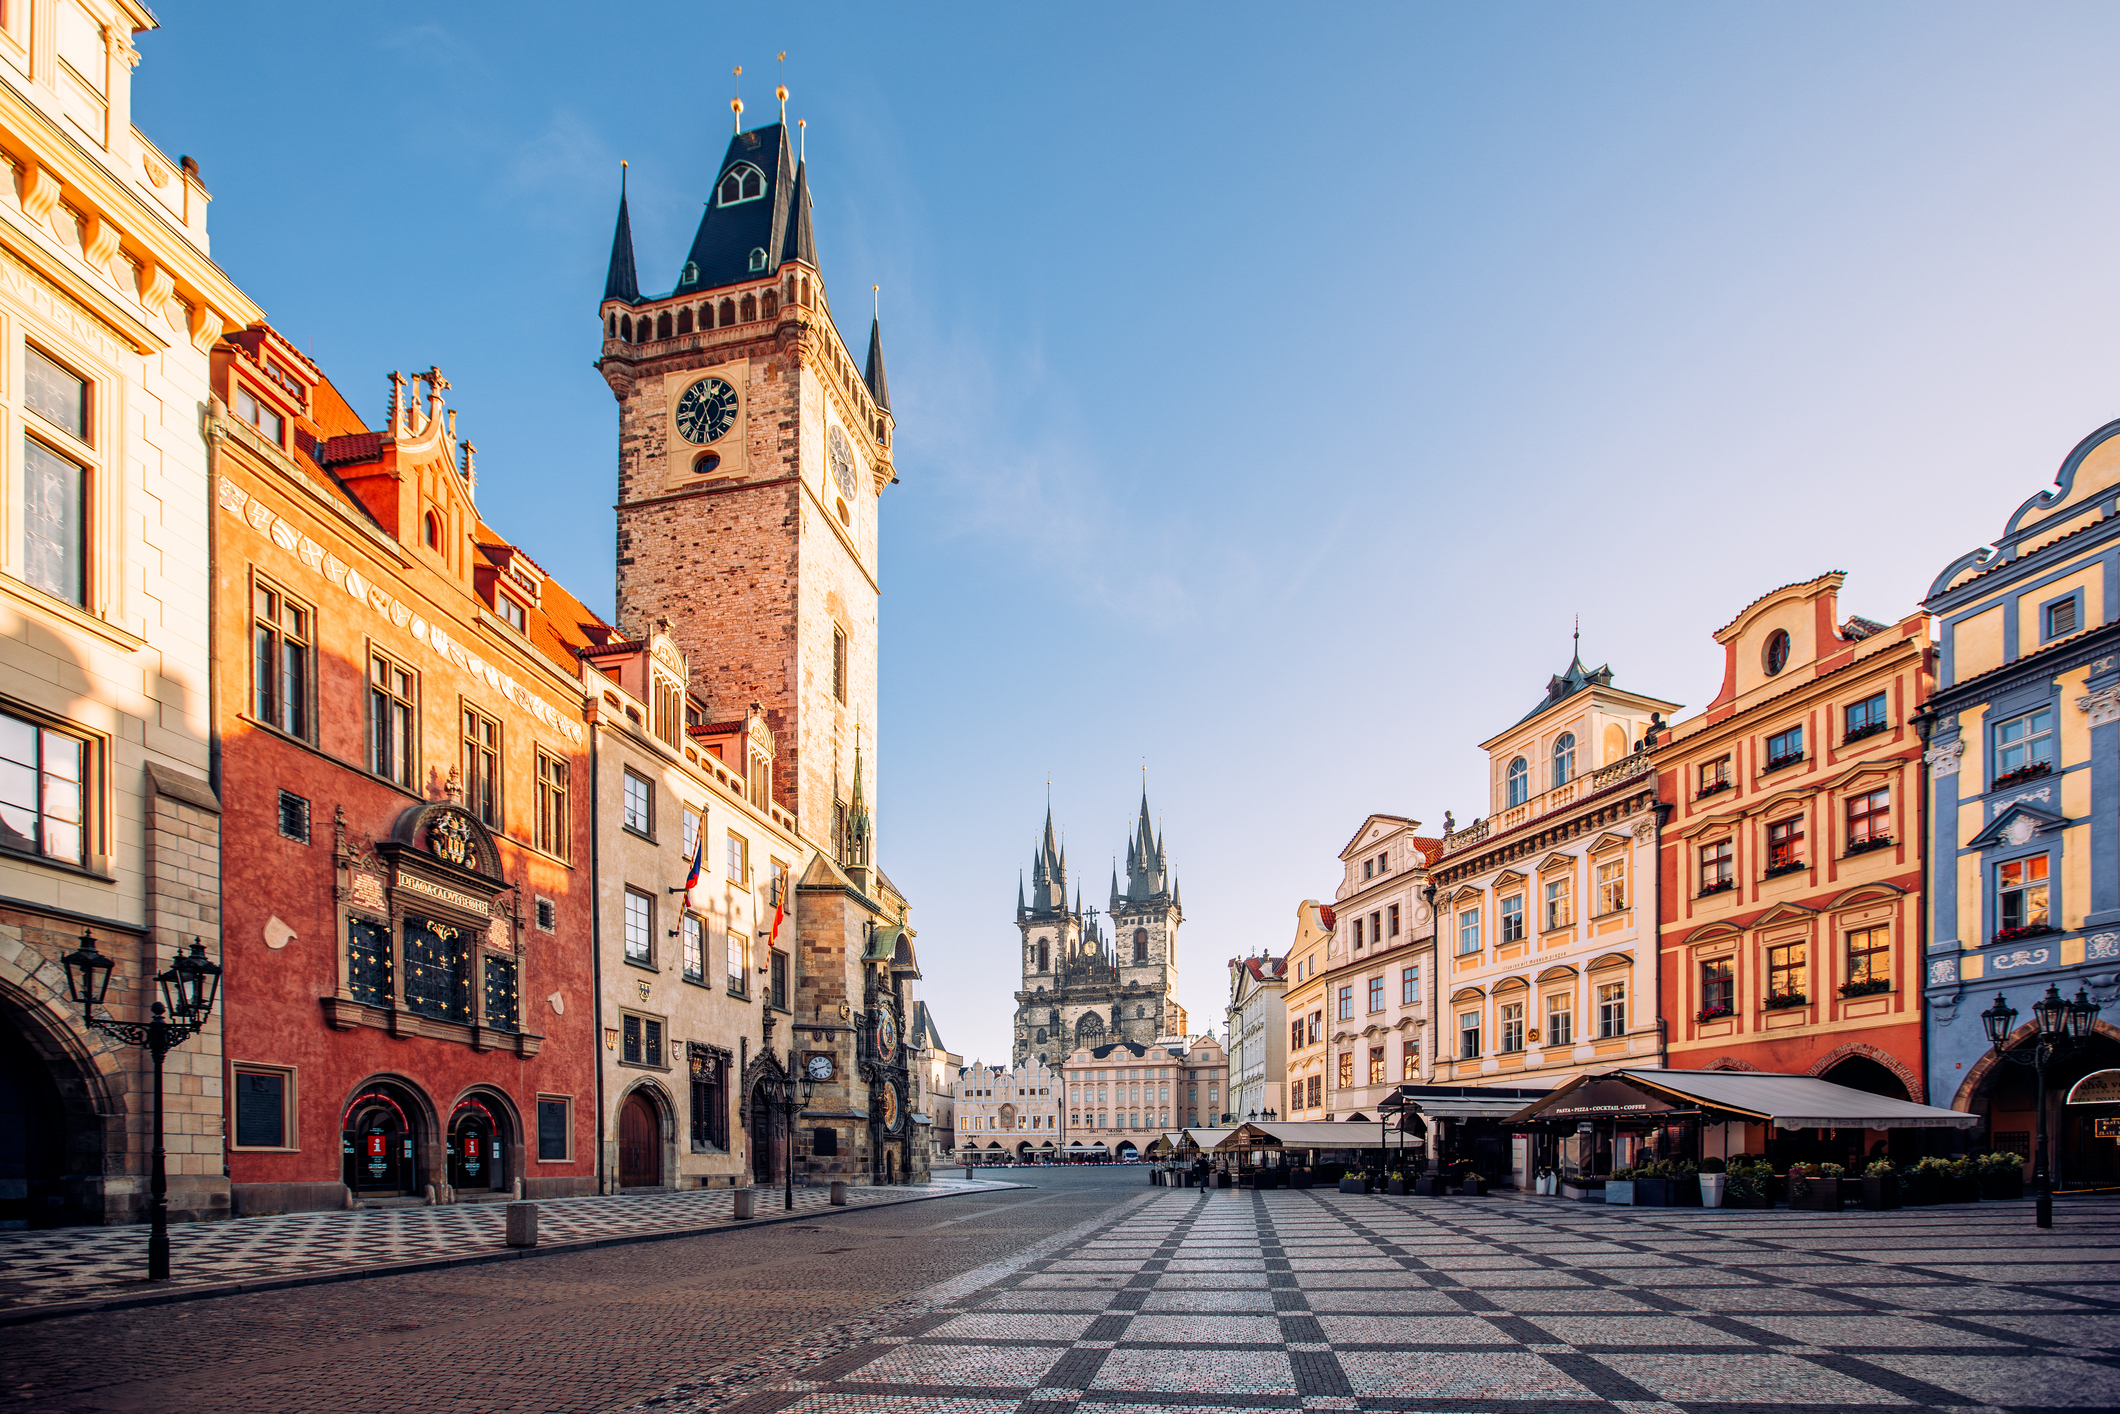 Old Town Square with historical buildings and clock tower in Prague, clear day